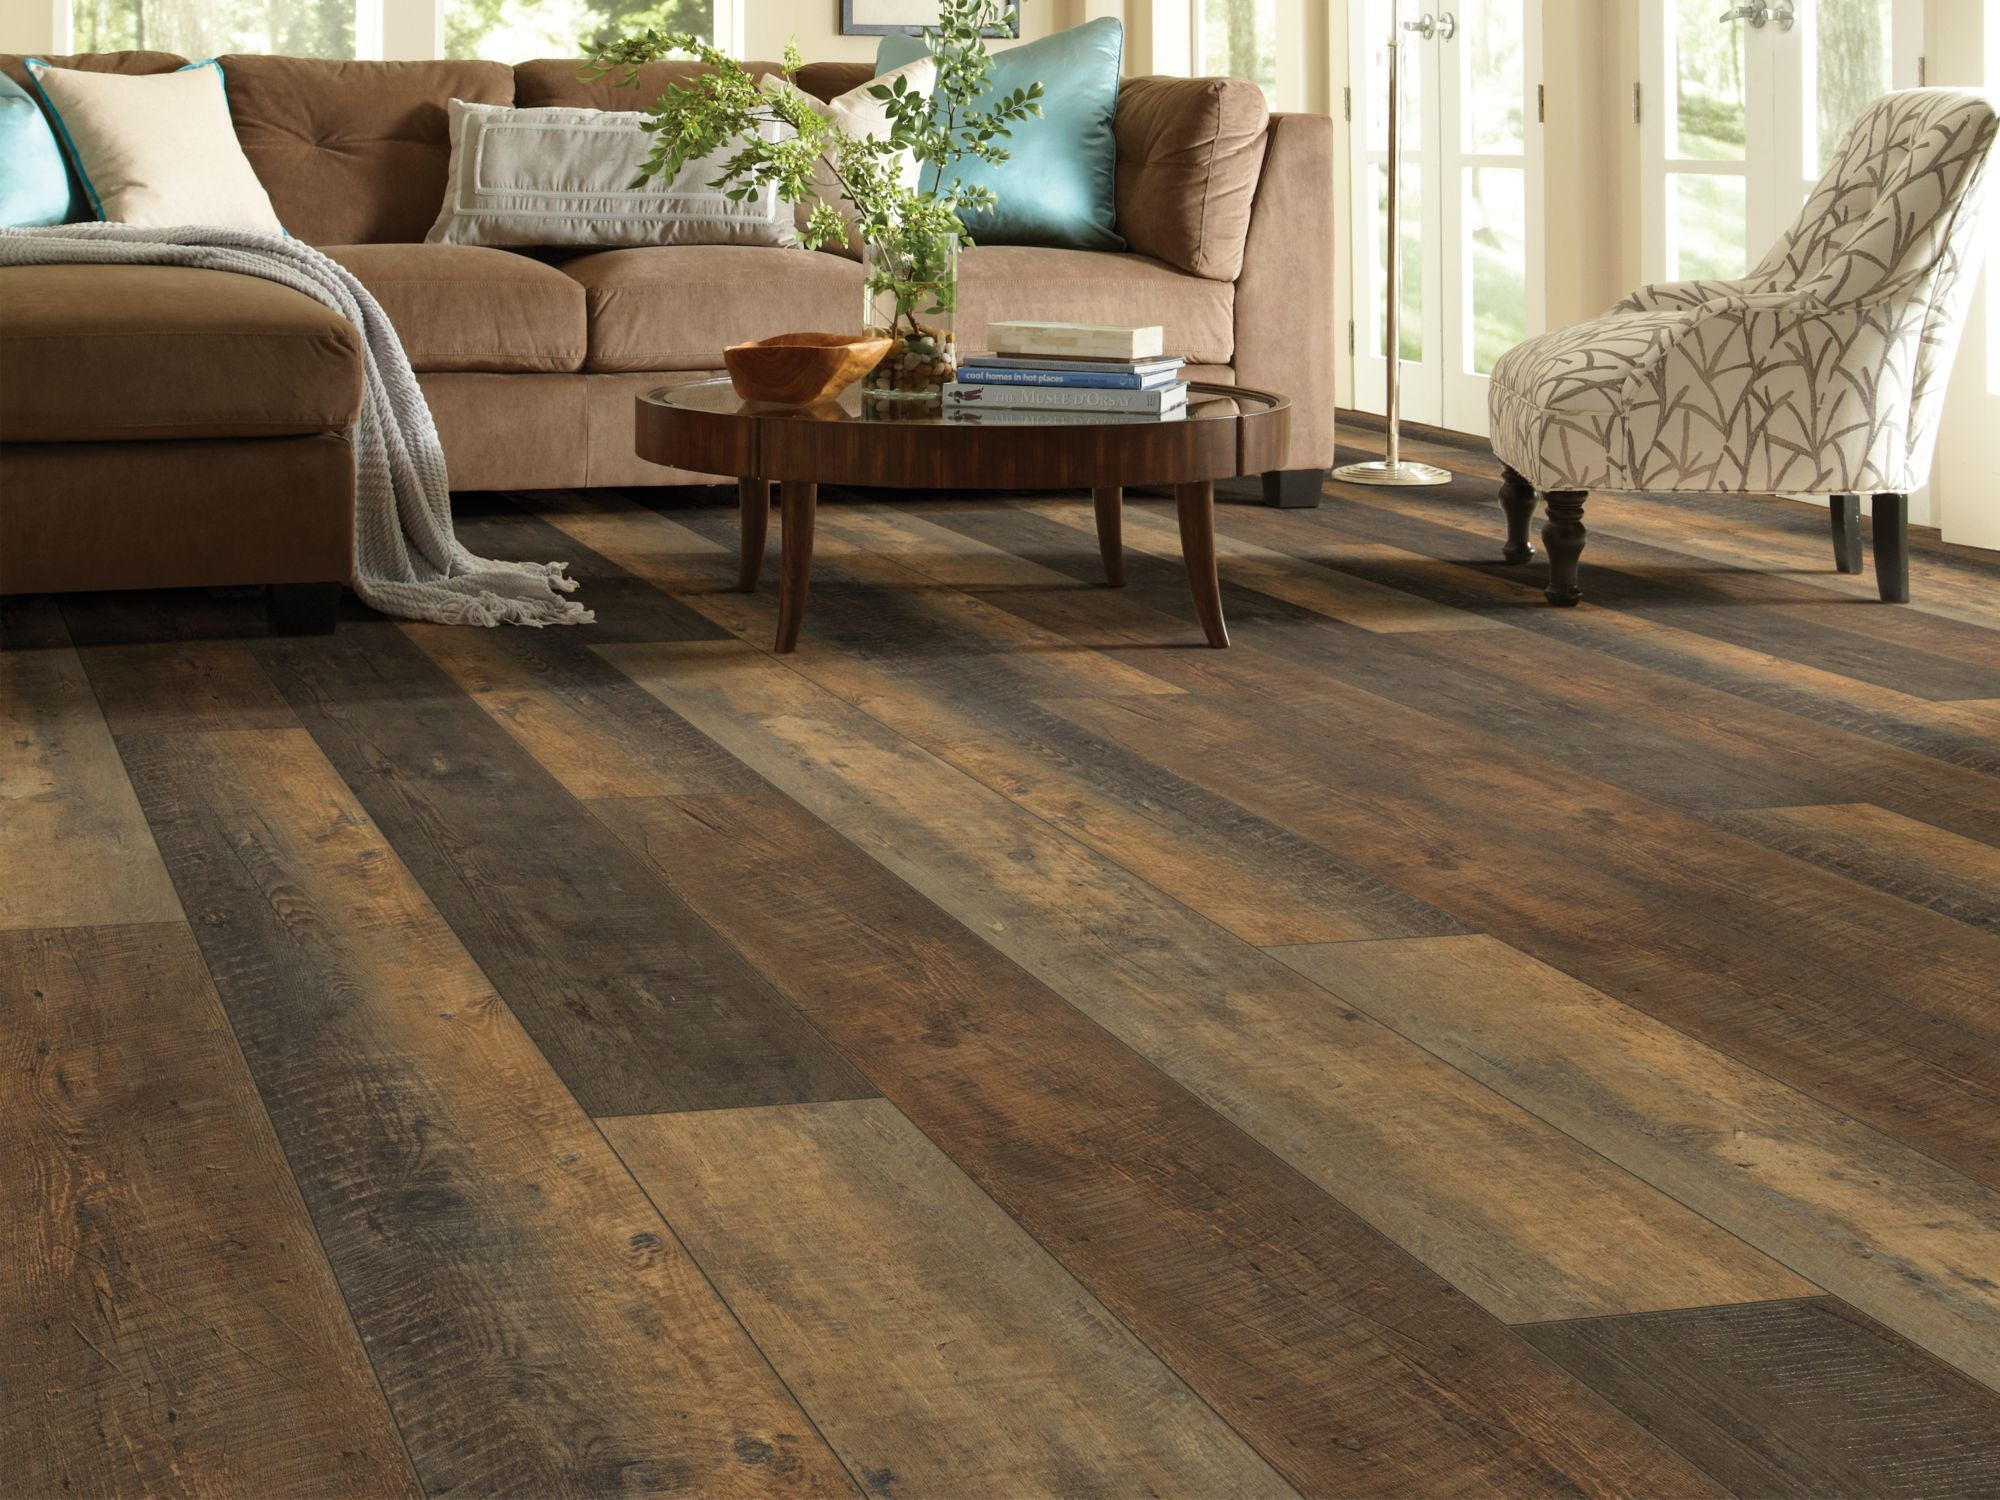 Fall in Love with Autumn Flooring: Trends for Your Home 2021